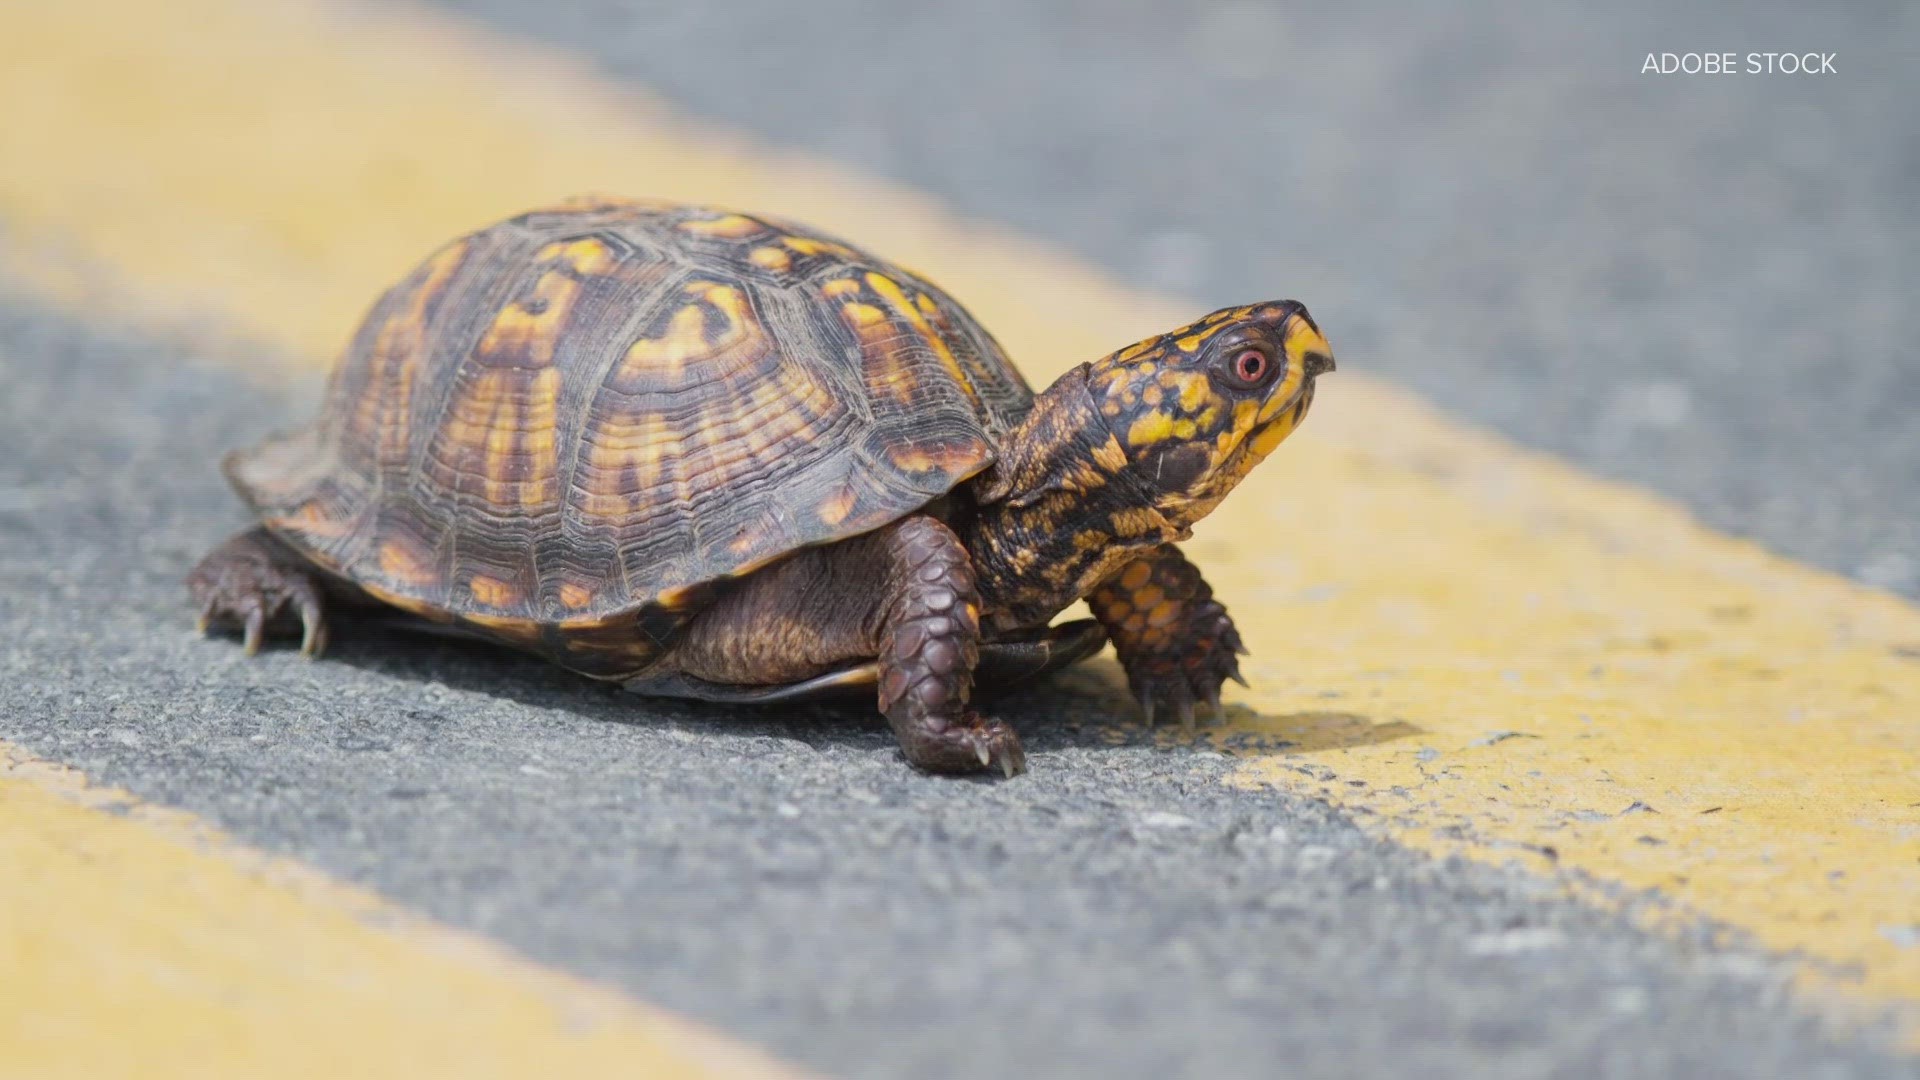 Researchers at the Saint Louis Zoo and Saint Louis University found box turtles have significant chances of encountering roadways. Here's how you can help them.